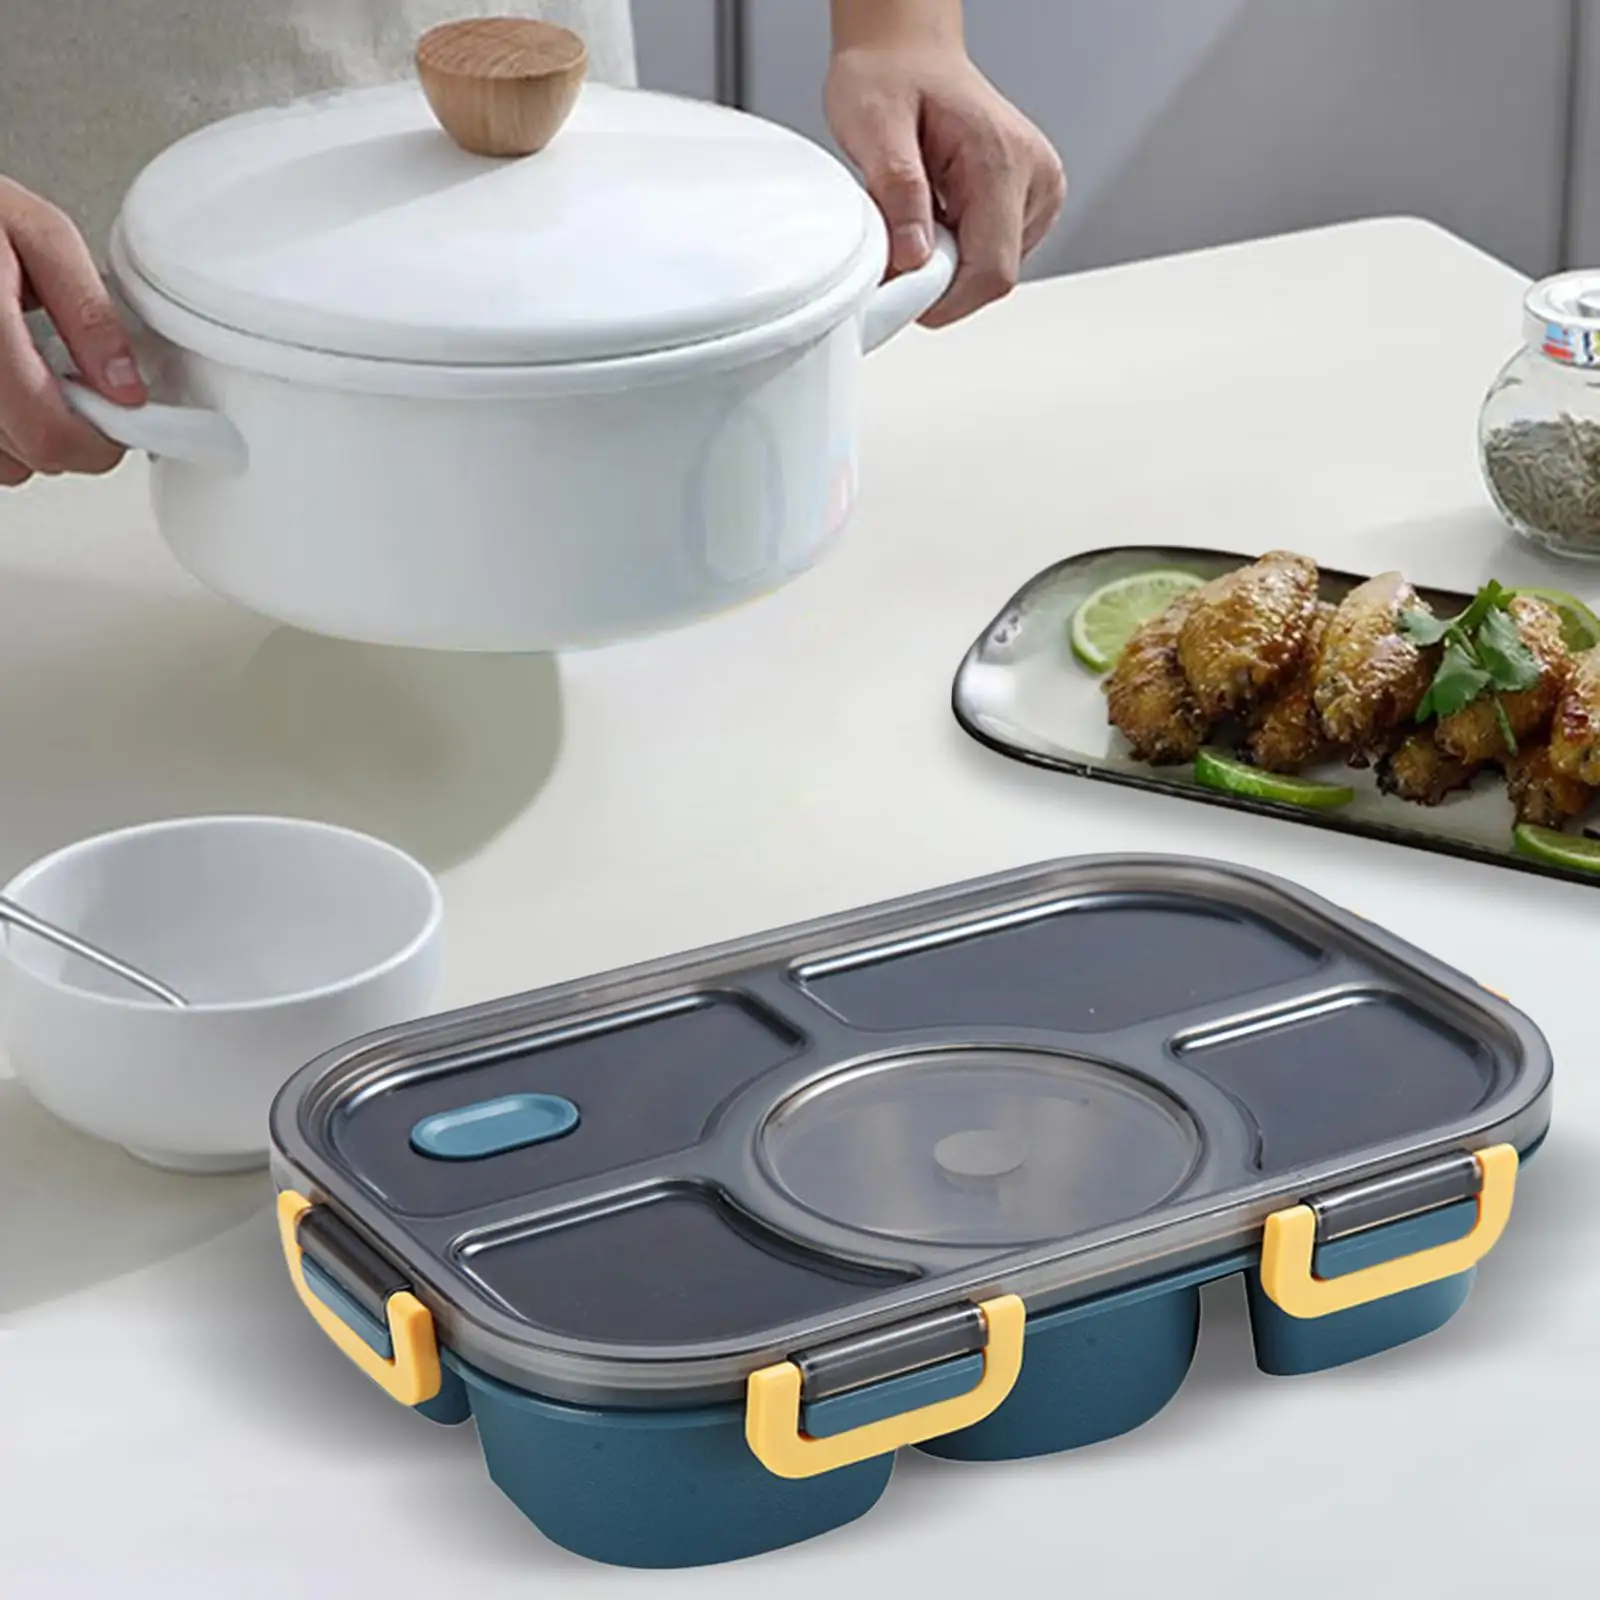 Lunch Box Multifunctional Food Container Lunch Container for Picnic Hiking Office